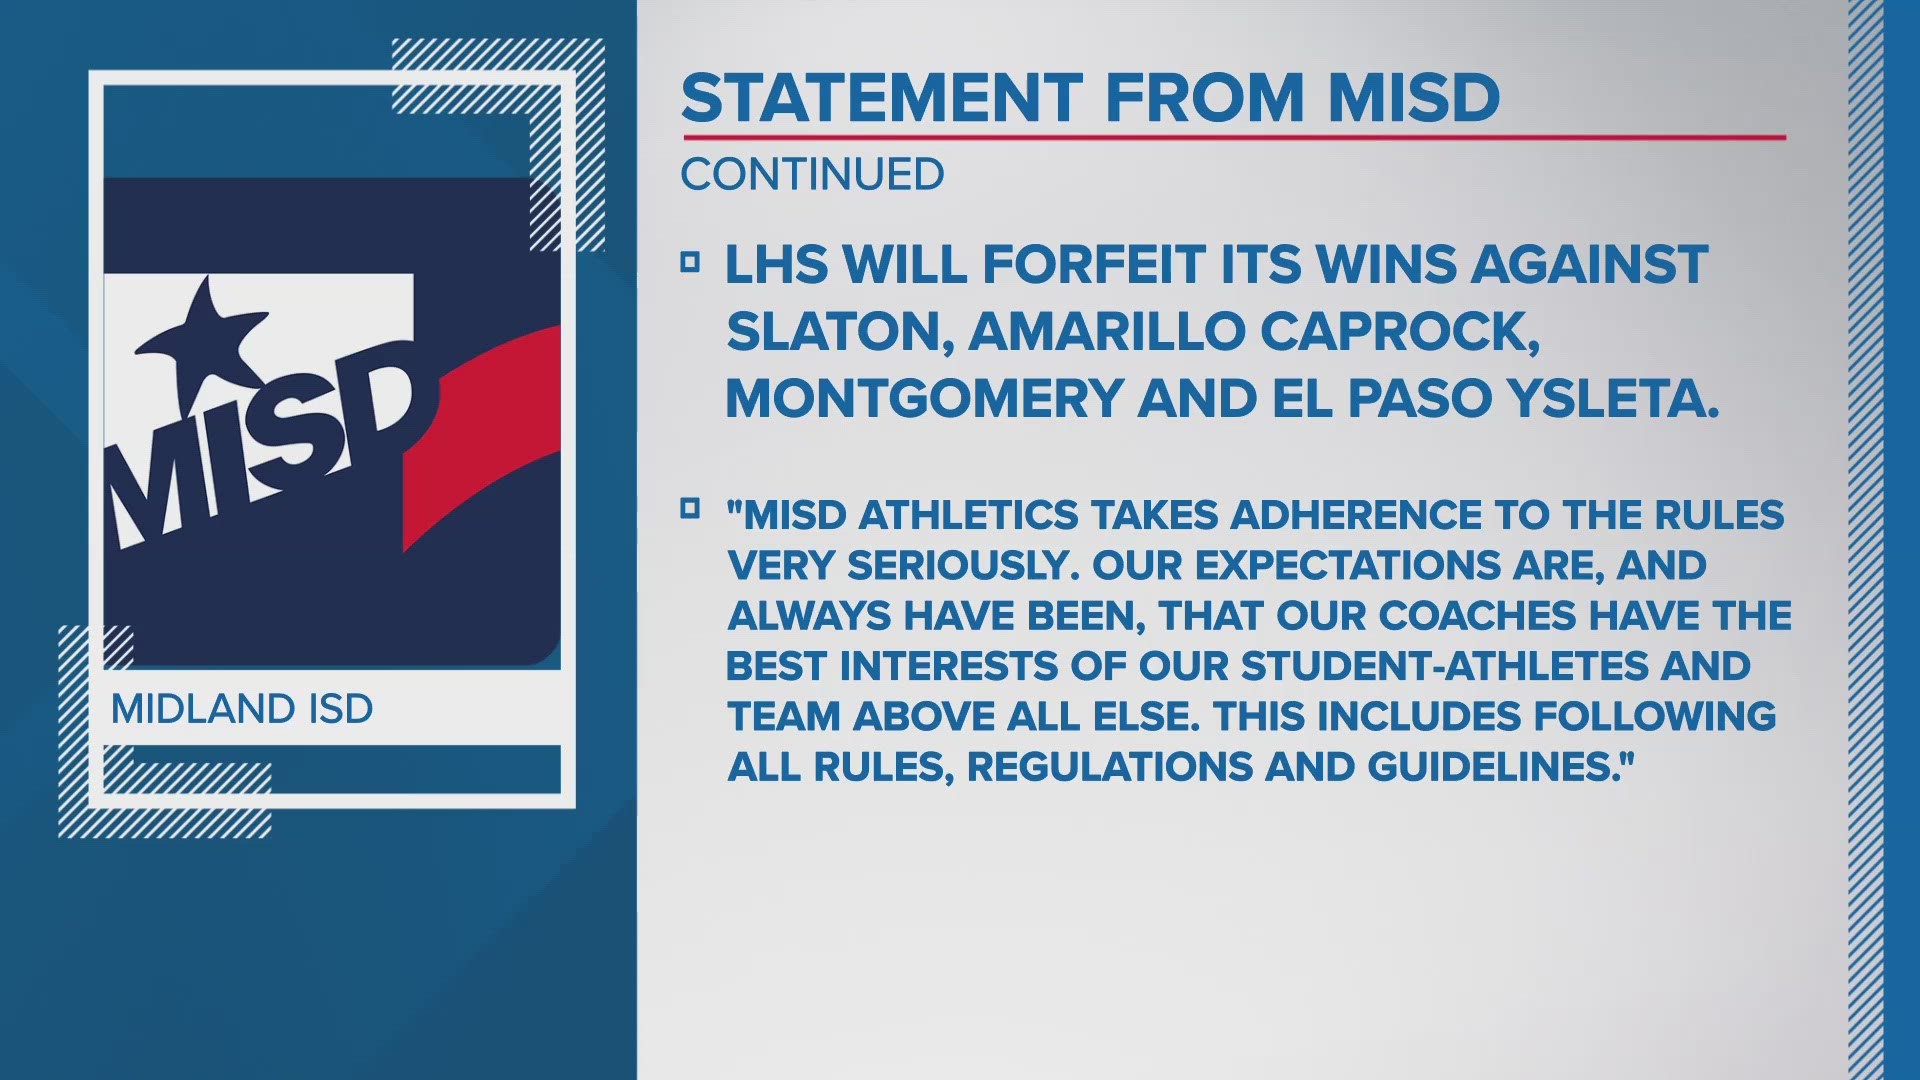 This suspension comes after the team was found to be in violation of UIL rules on student eligibility.